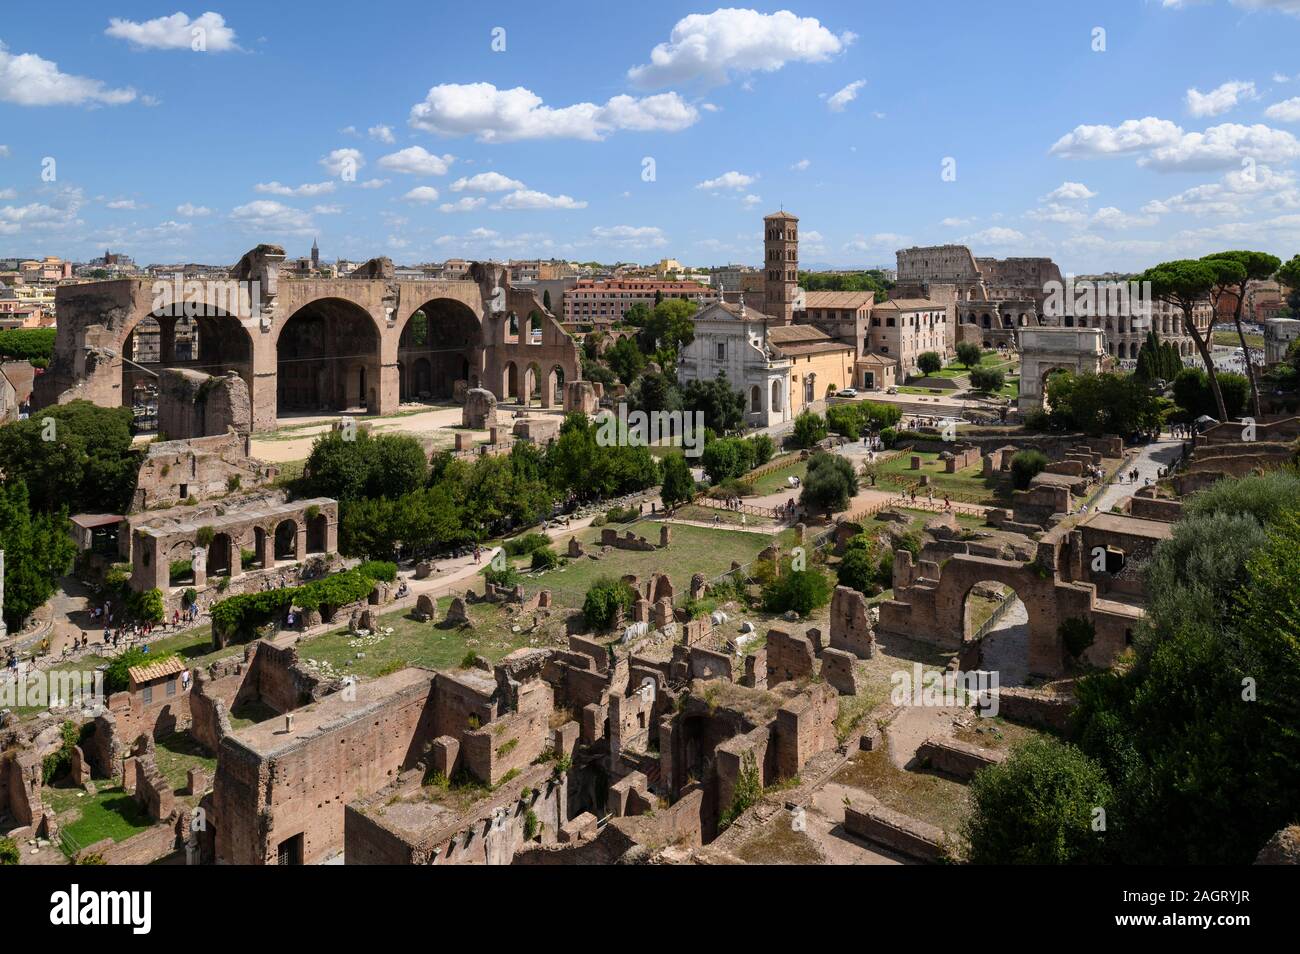 Rome. Italy. View of the Roman Forum (Forum Romanum/Foro Romano) from the Palatine Hill.   On the left is the Basilica of Maxentius and Constantine, t Stock Photo